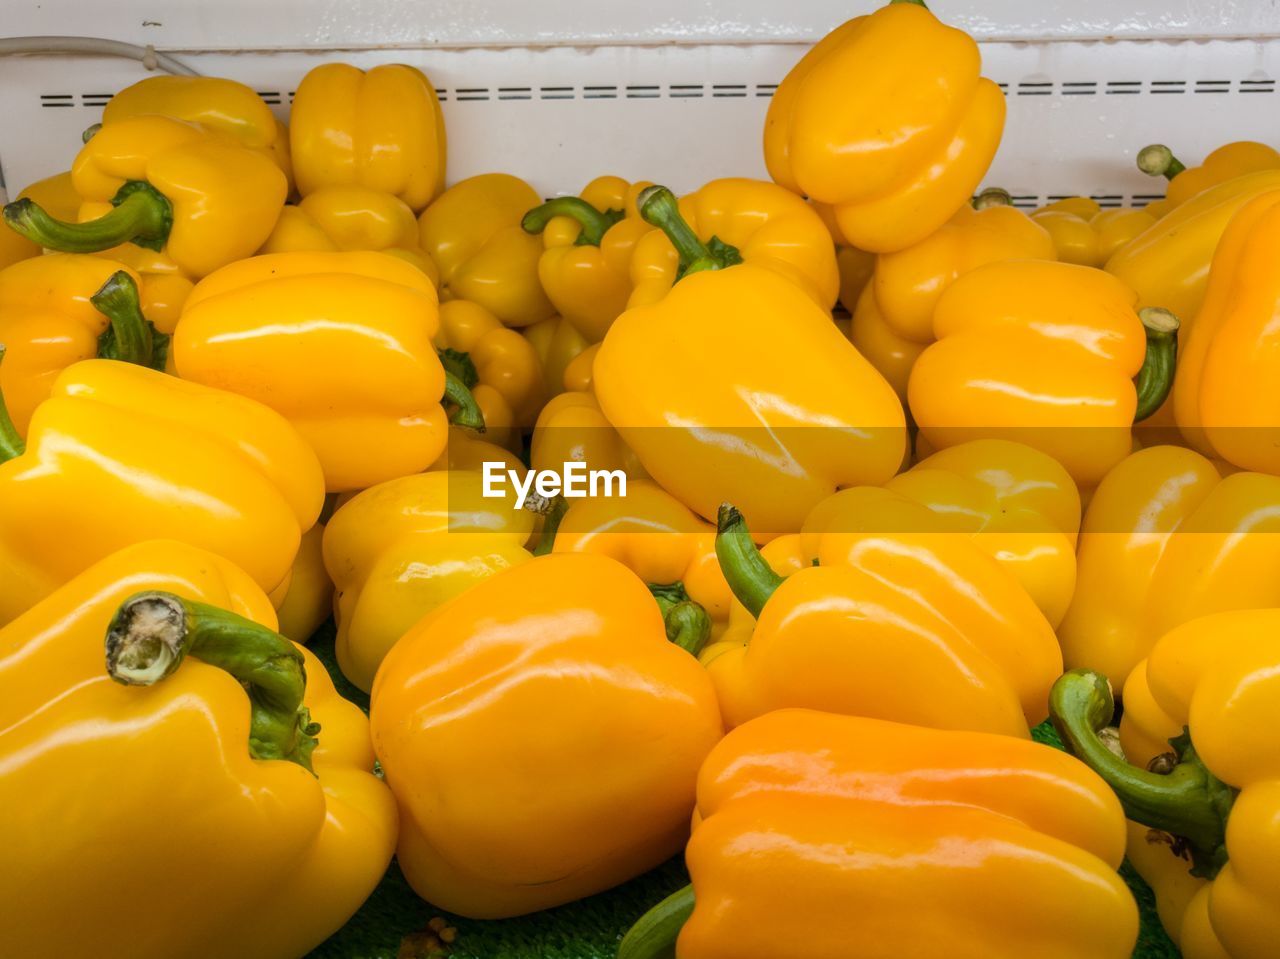 Close-up of yellow bell peppers for sale in market